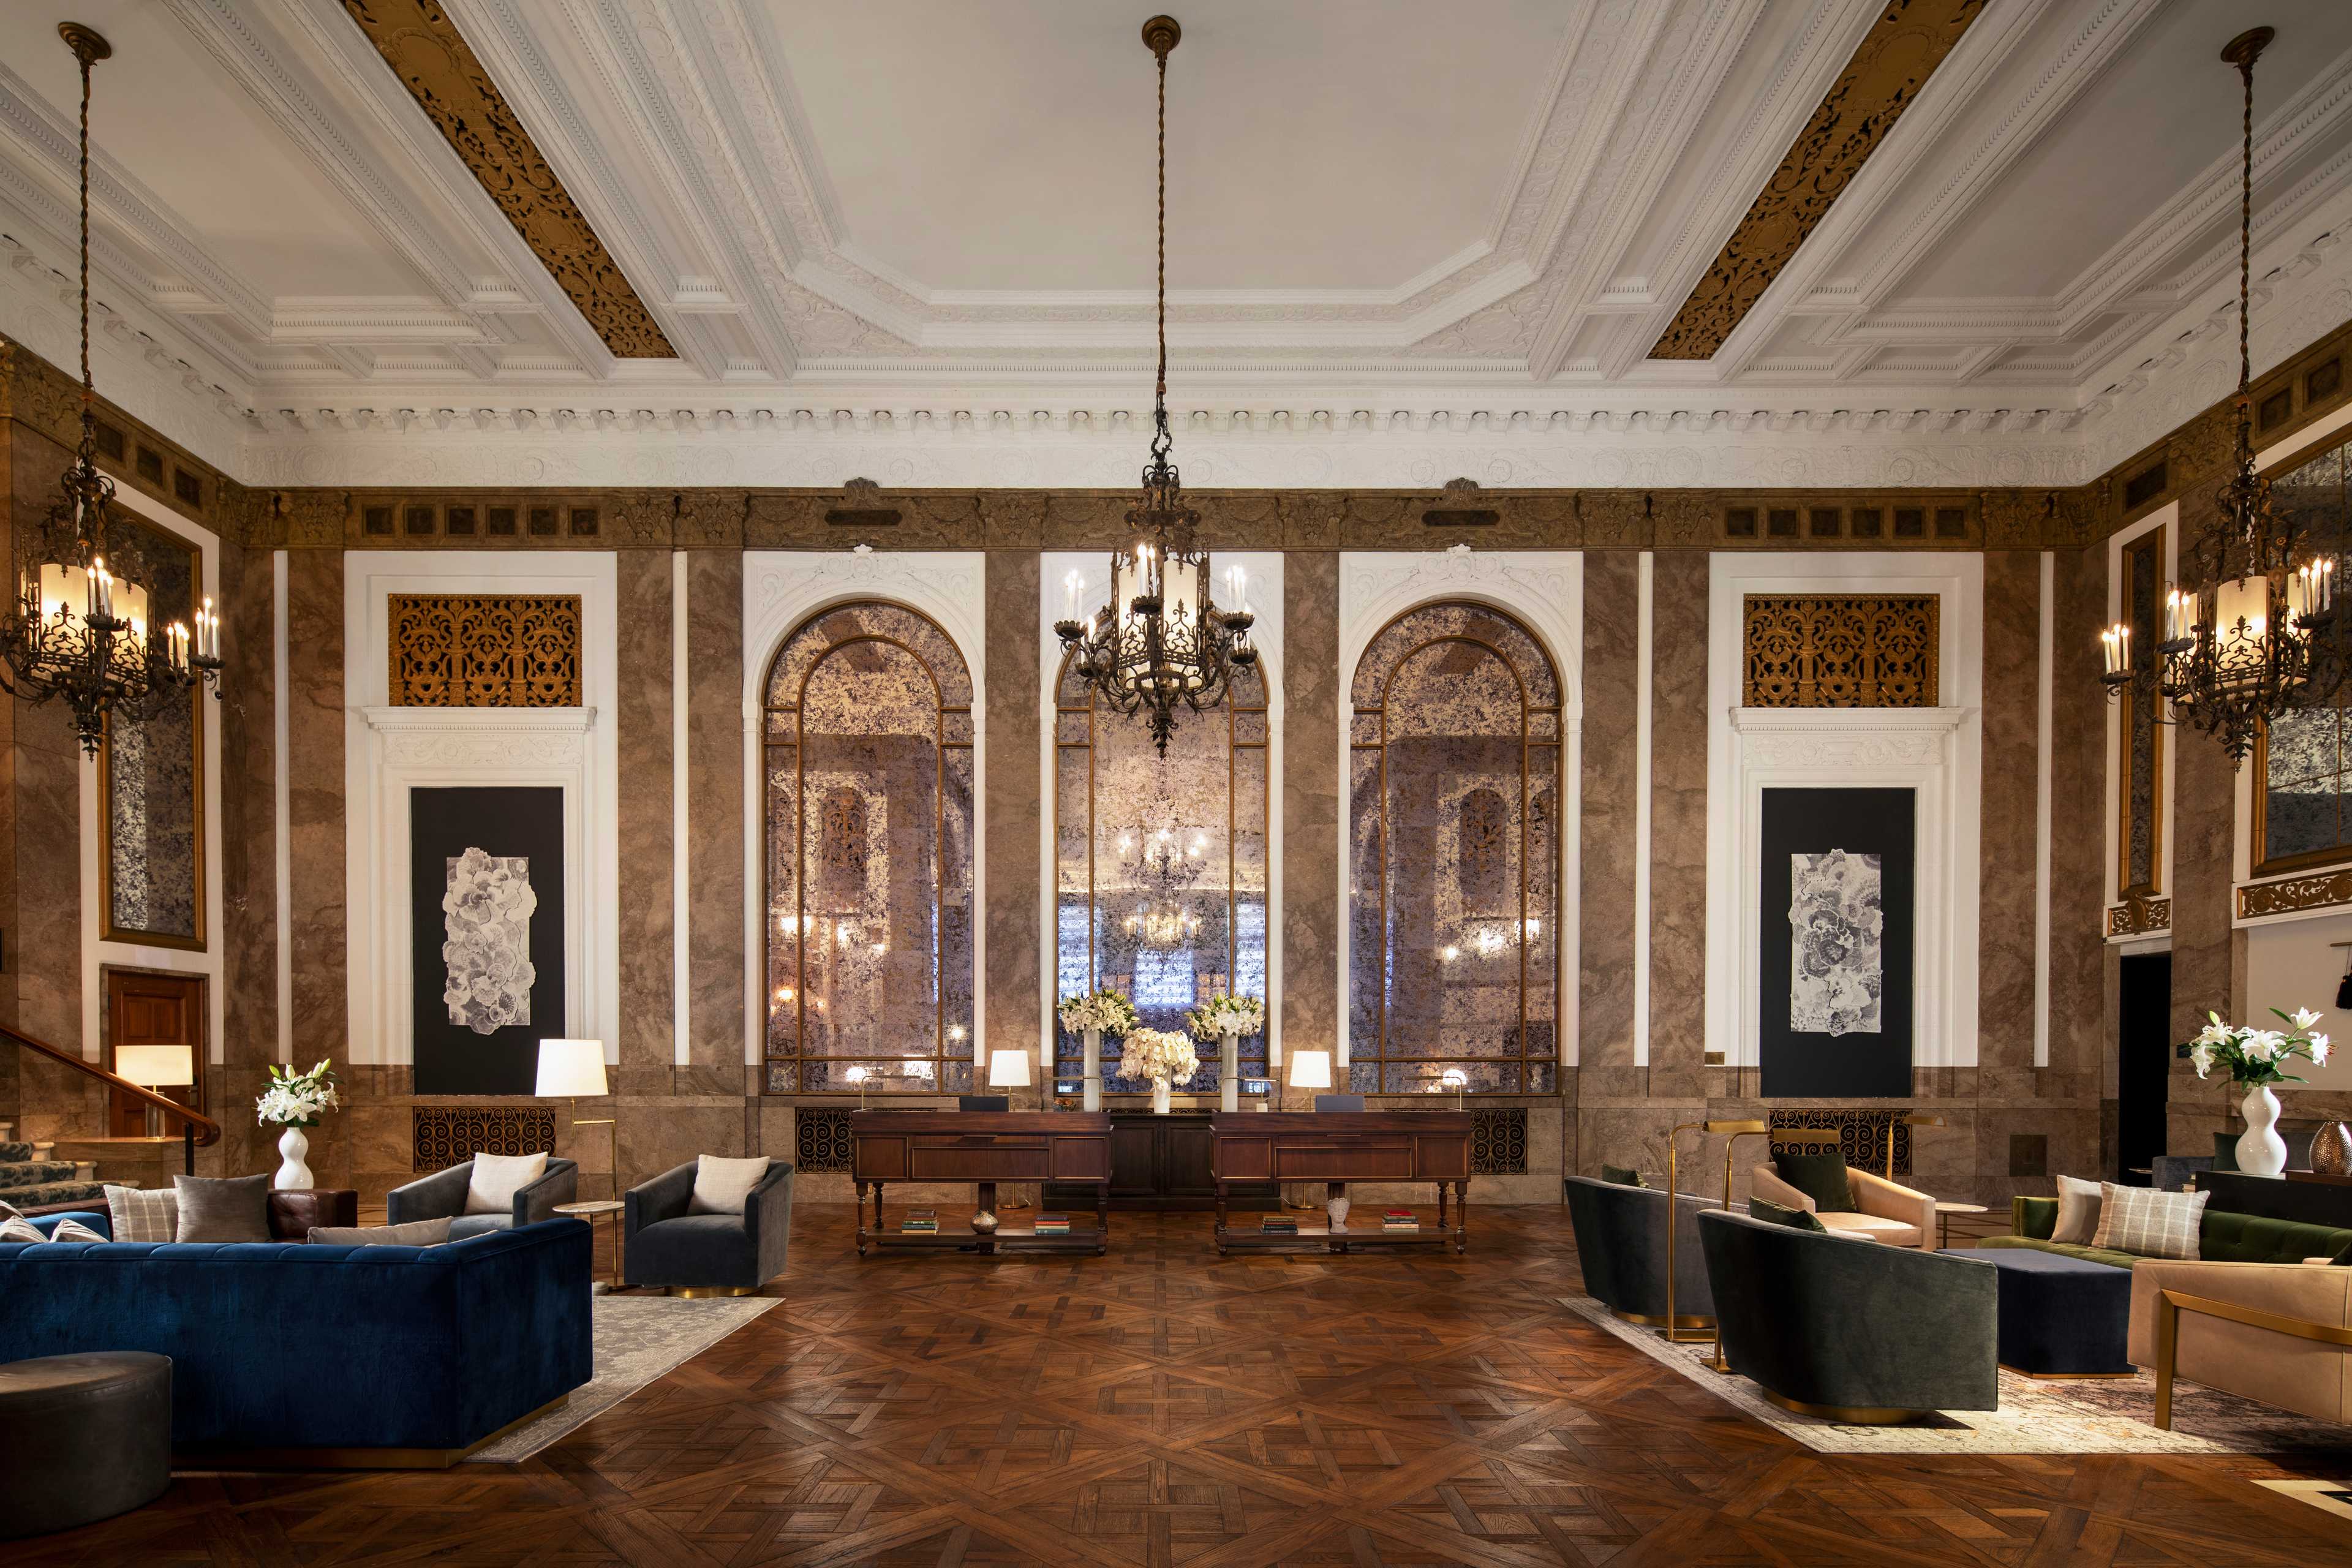 the lobby of a hotel with ornate ceilings and chandeliers.